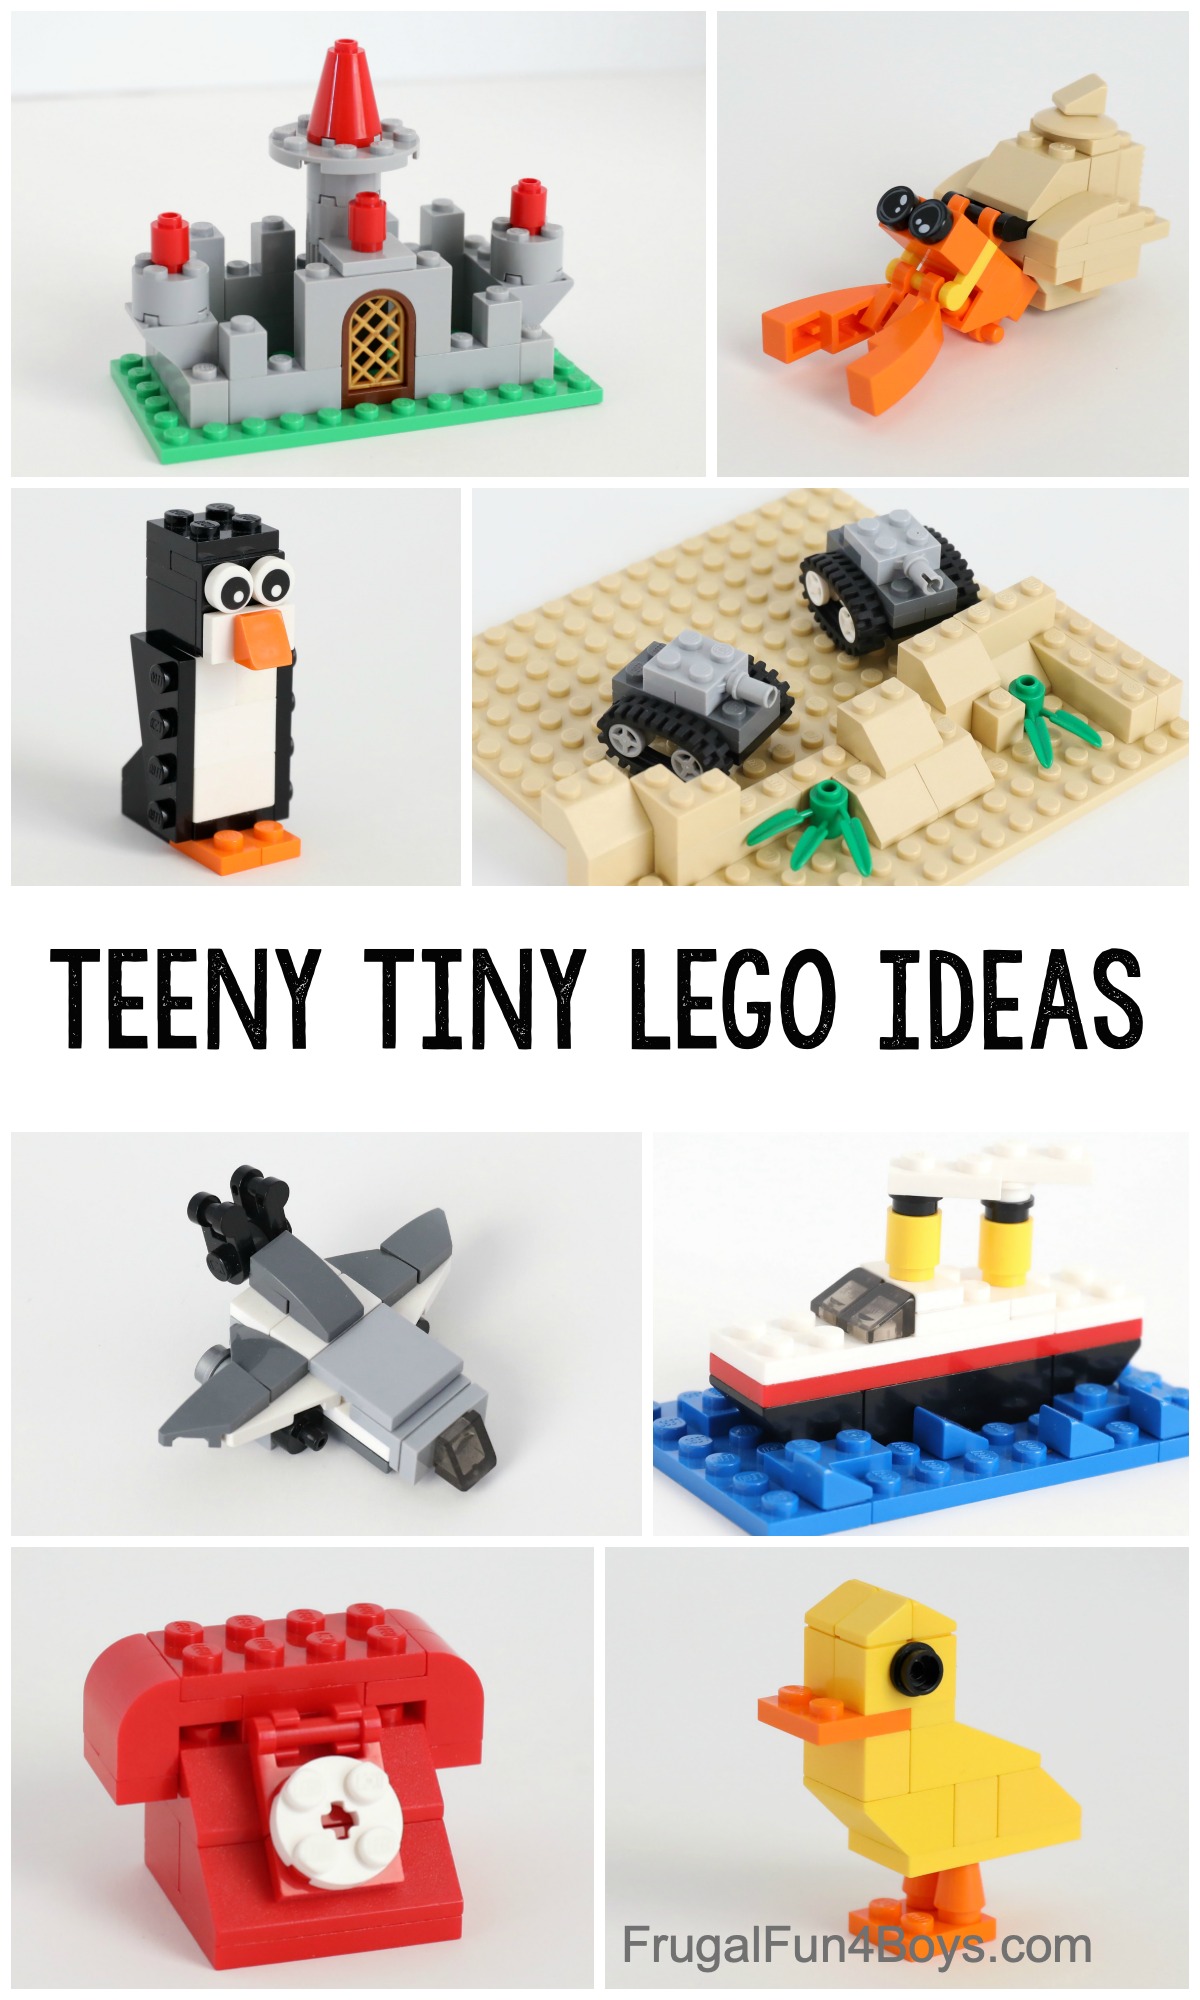 Mini LEGO Projects to build